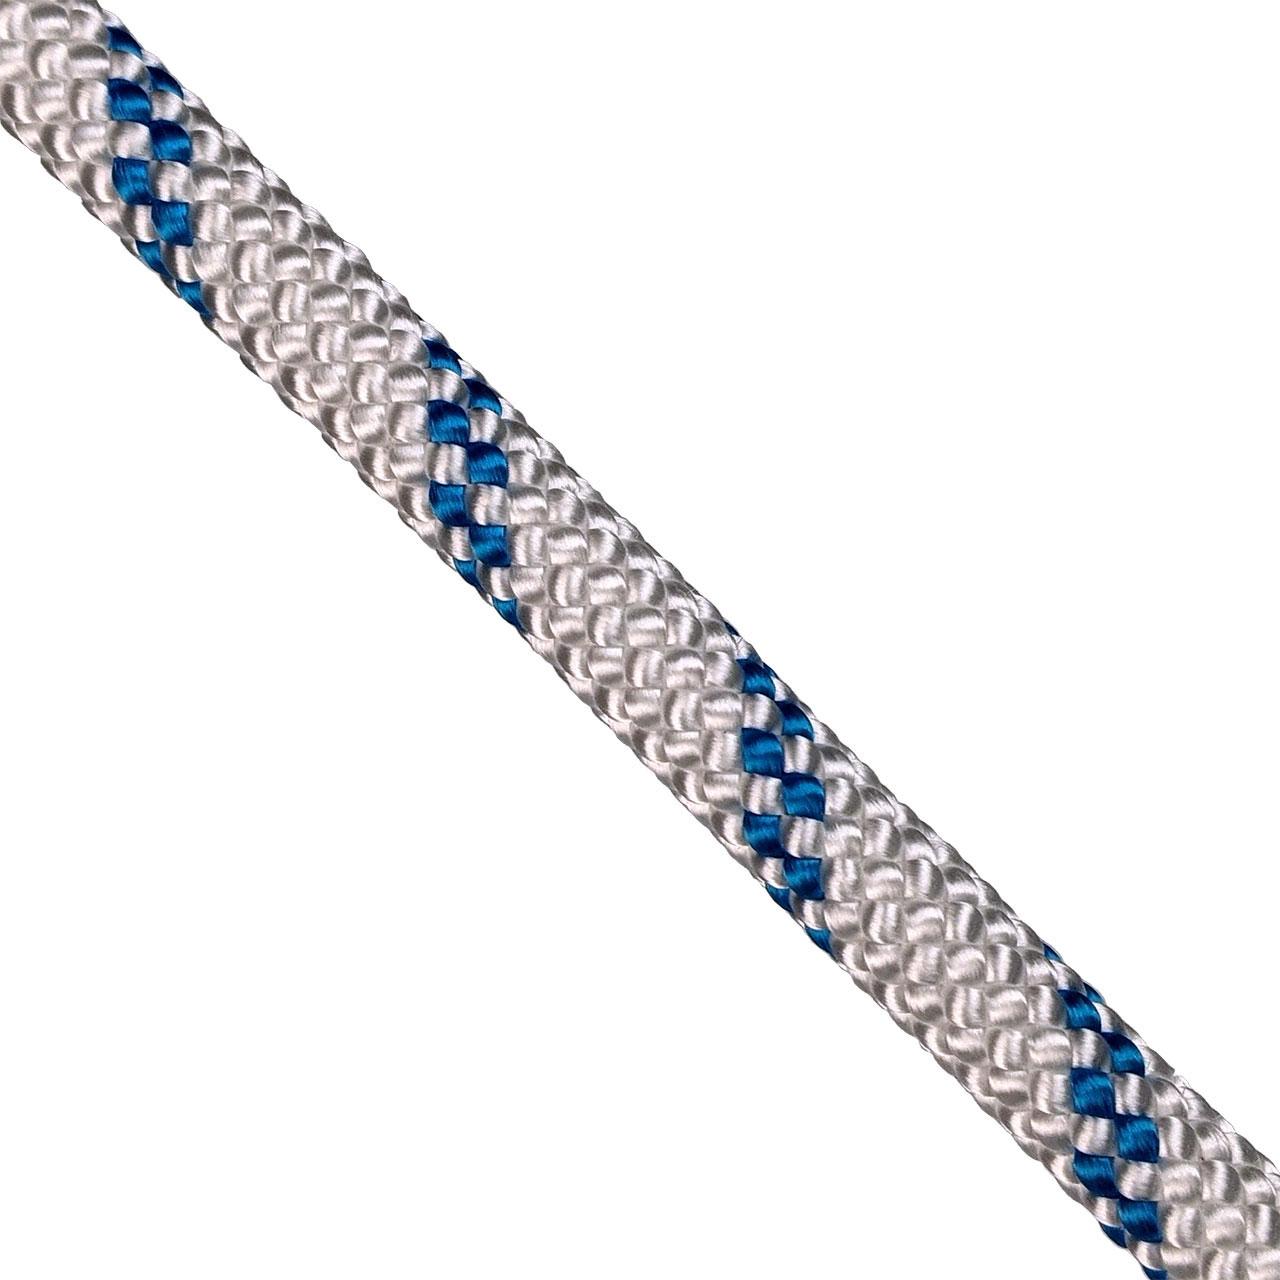 DGR 11mm Climbing Rope by Blue Water